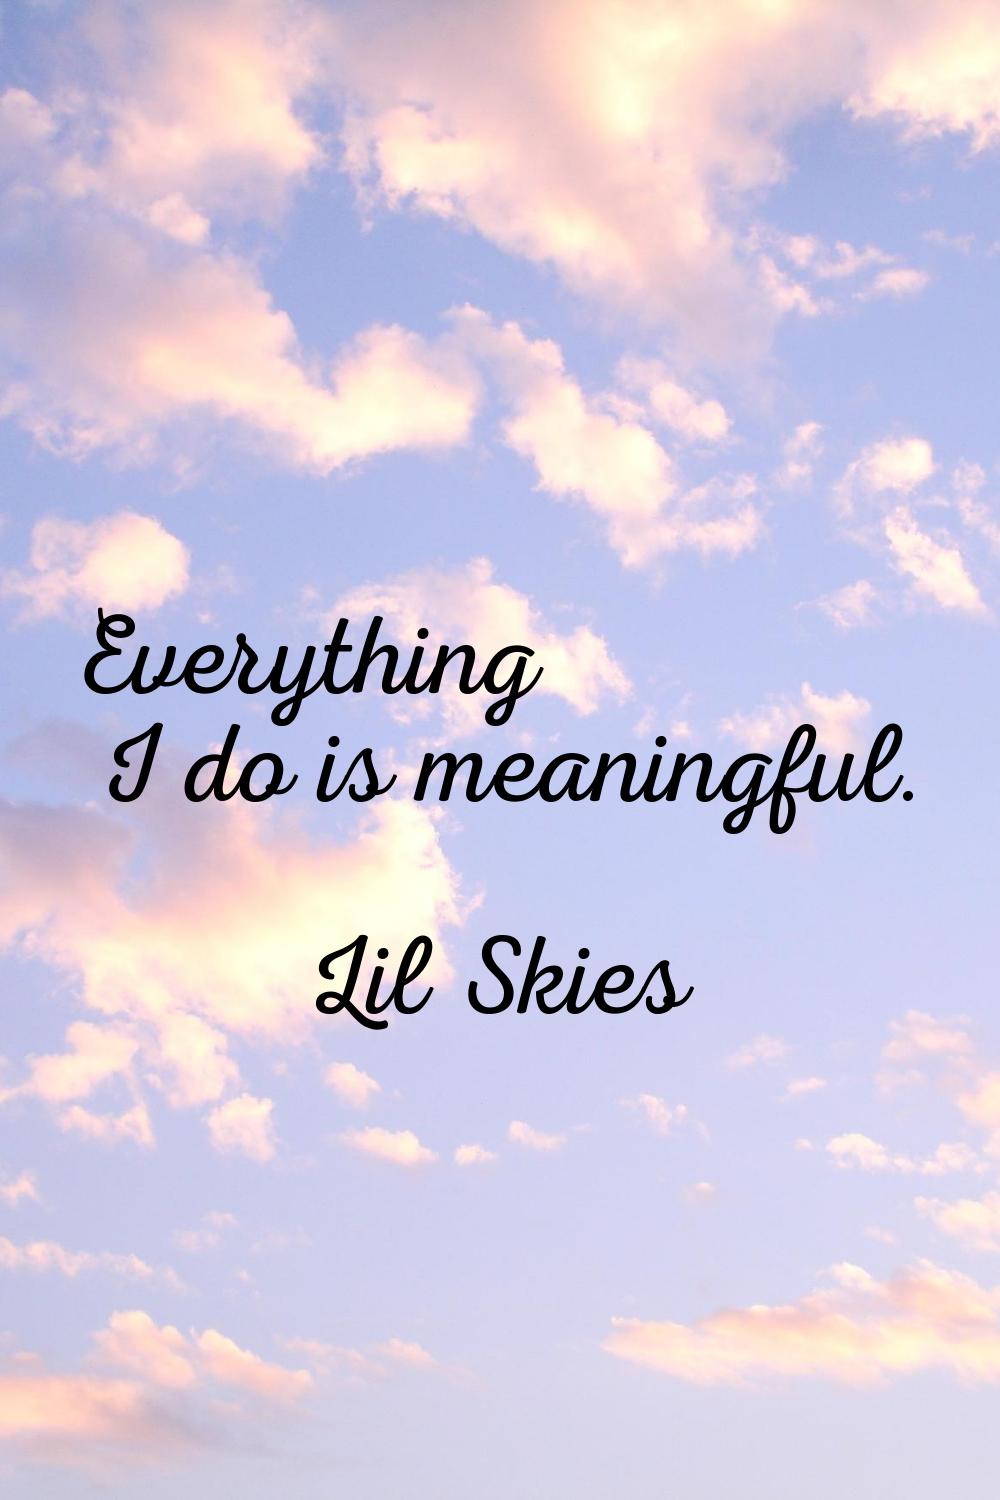 Everything I do is meaningful.